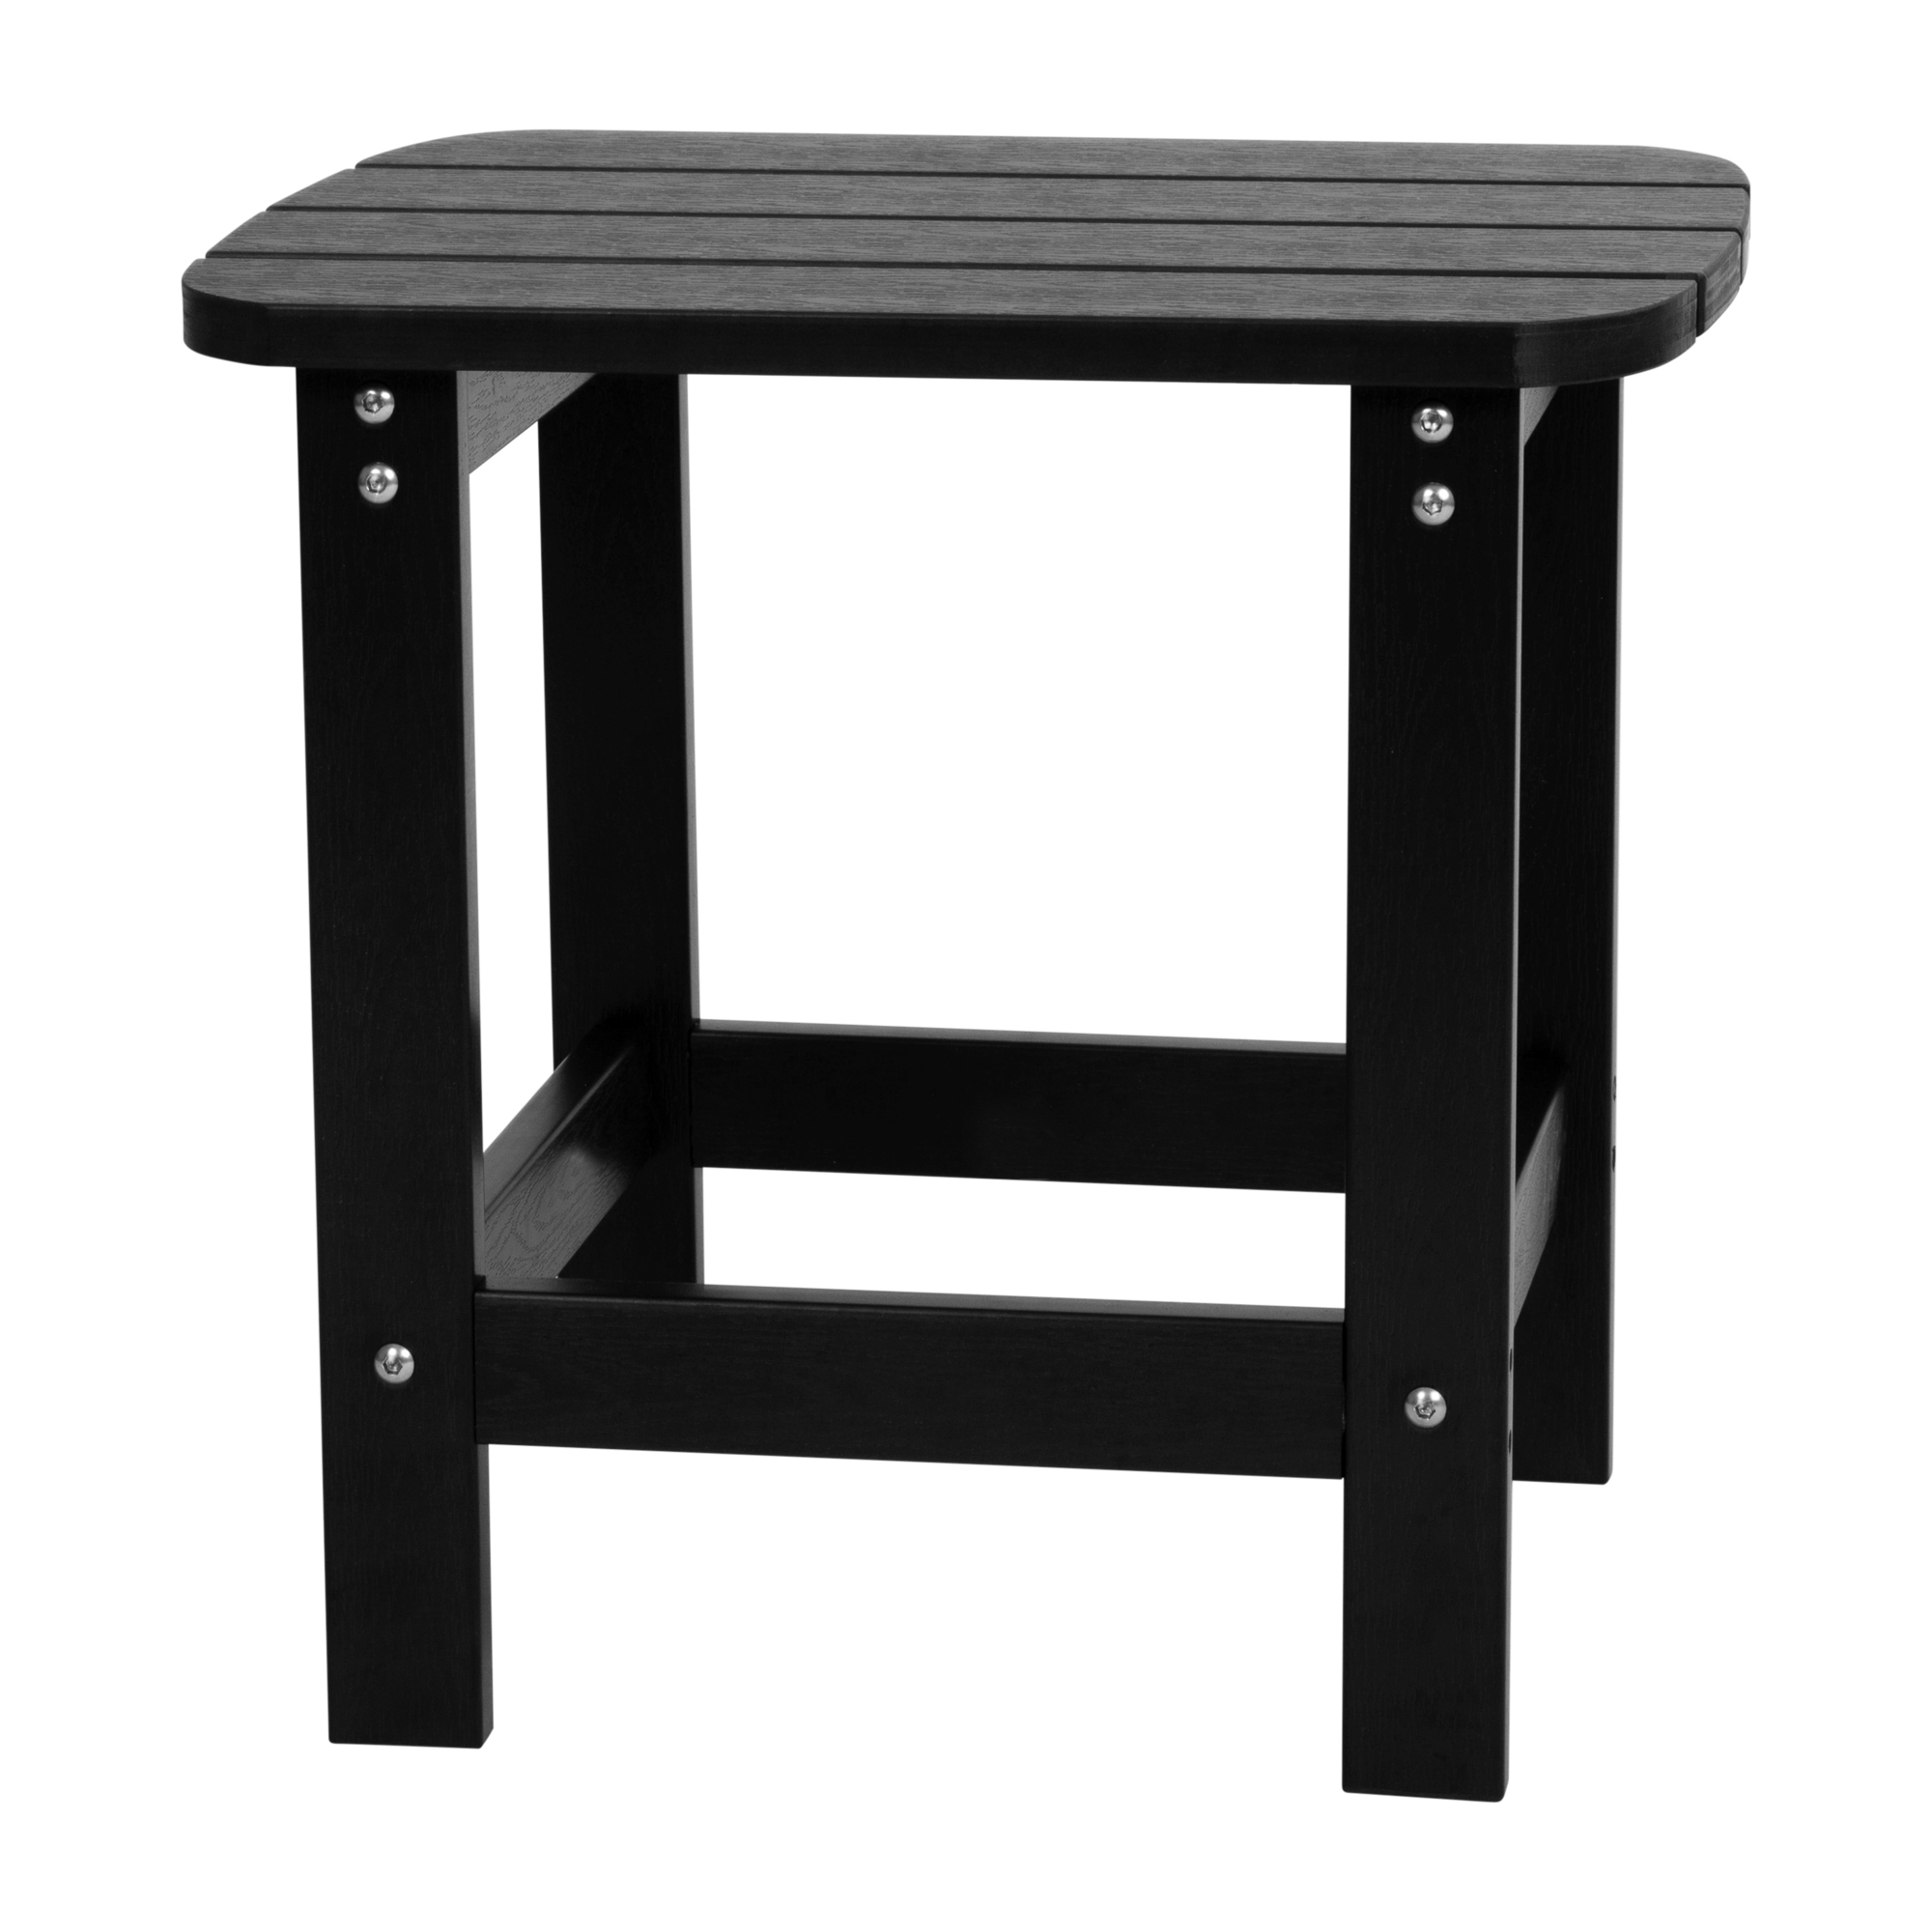 Flash Furniture, Black All-Weather Adirondack Side Table, Table Shape Rectangle, Primary Color Black, Height 18.25 in, Model JJT14001BLK